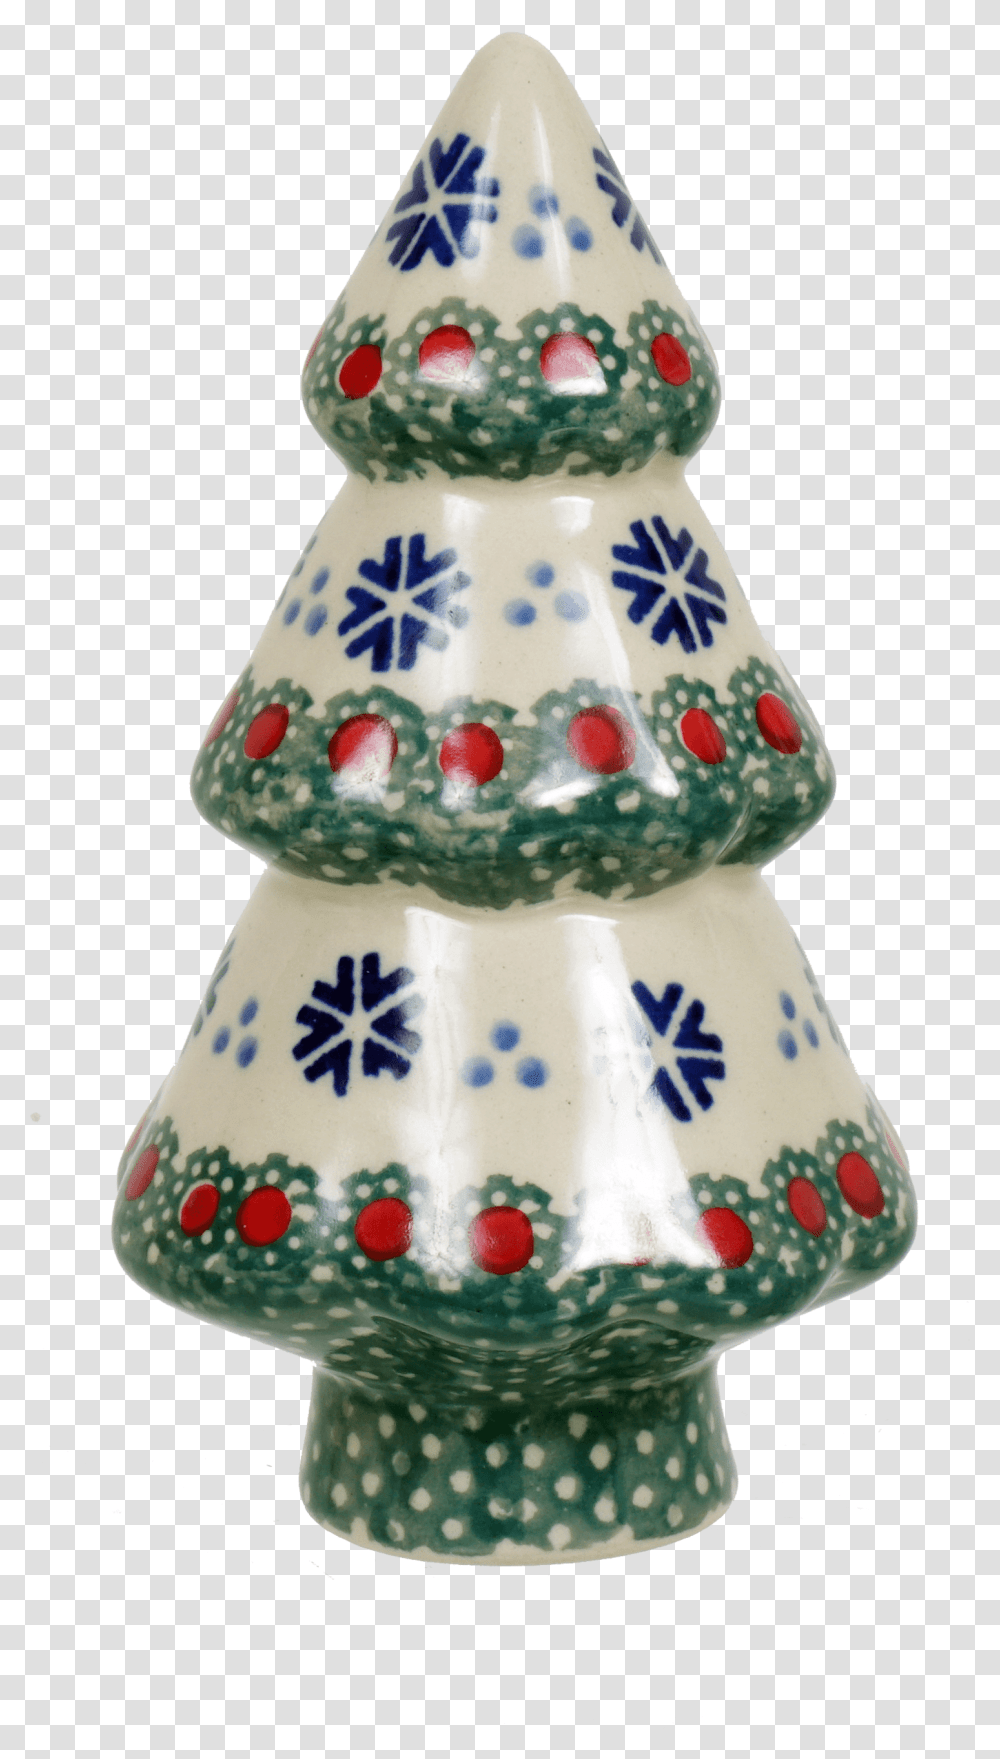 Christmas Tree Table OrnamentClass Lazyload Lazyload Christmas Ornament, Porcelain, Pottery, Snowman Transparent Png